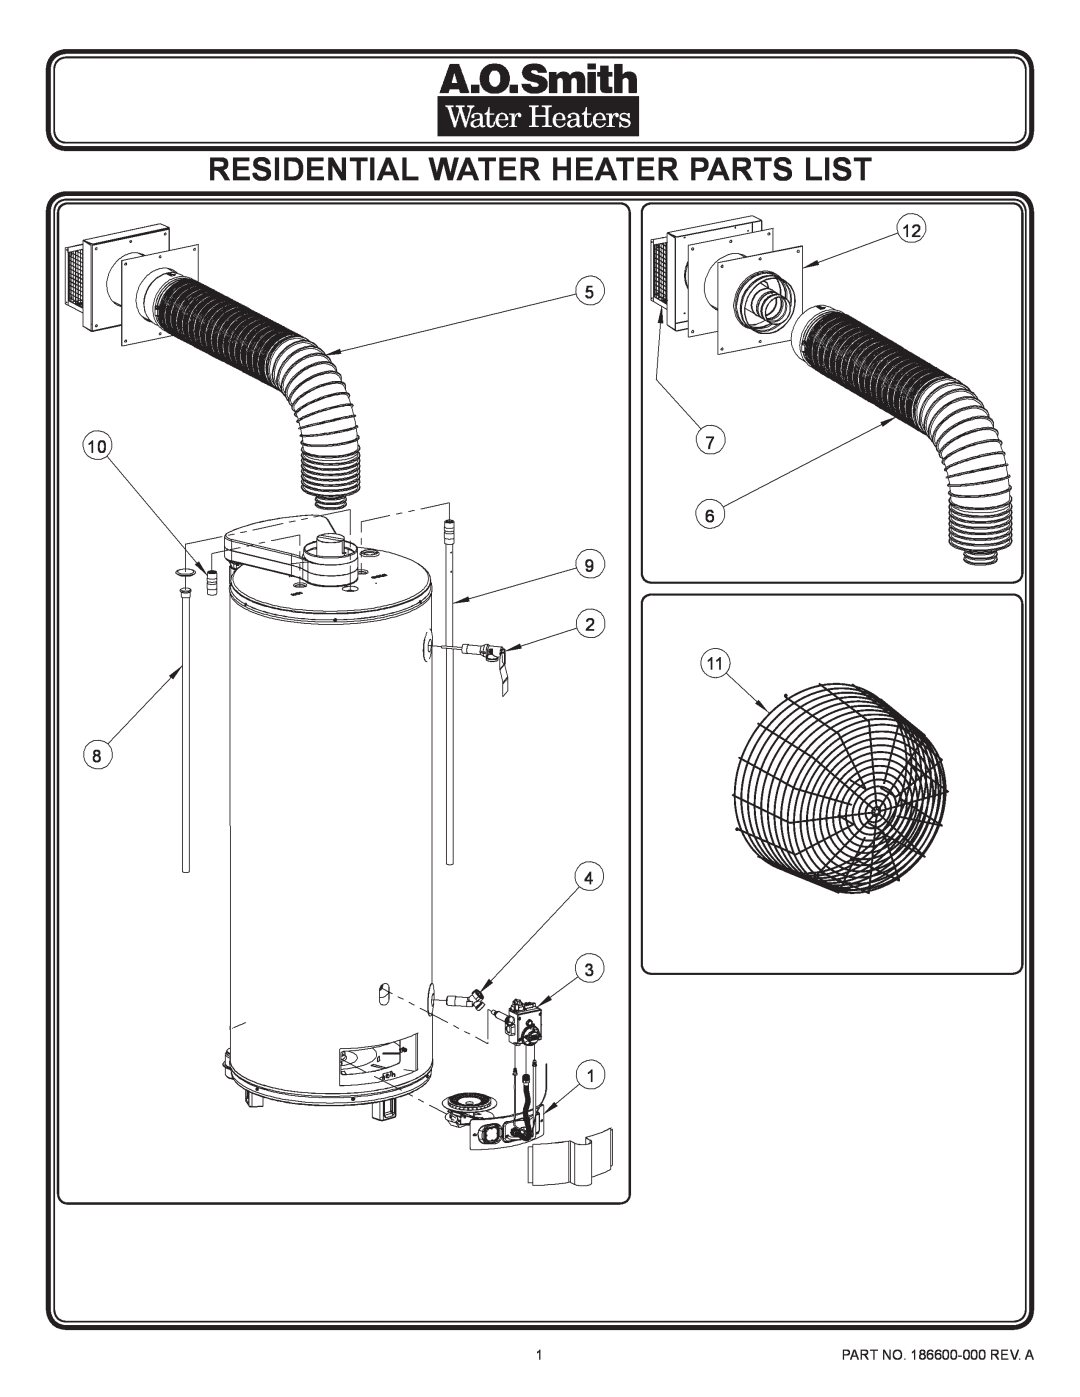 A.O. Smith manual Residential Water Heater Parts List, PART NO. 186600-000 REV. A 